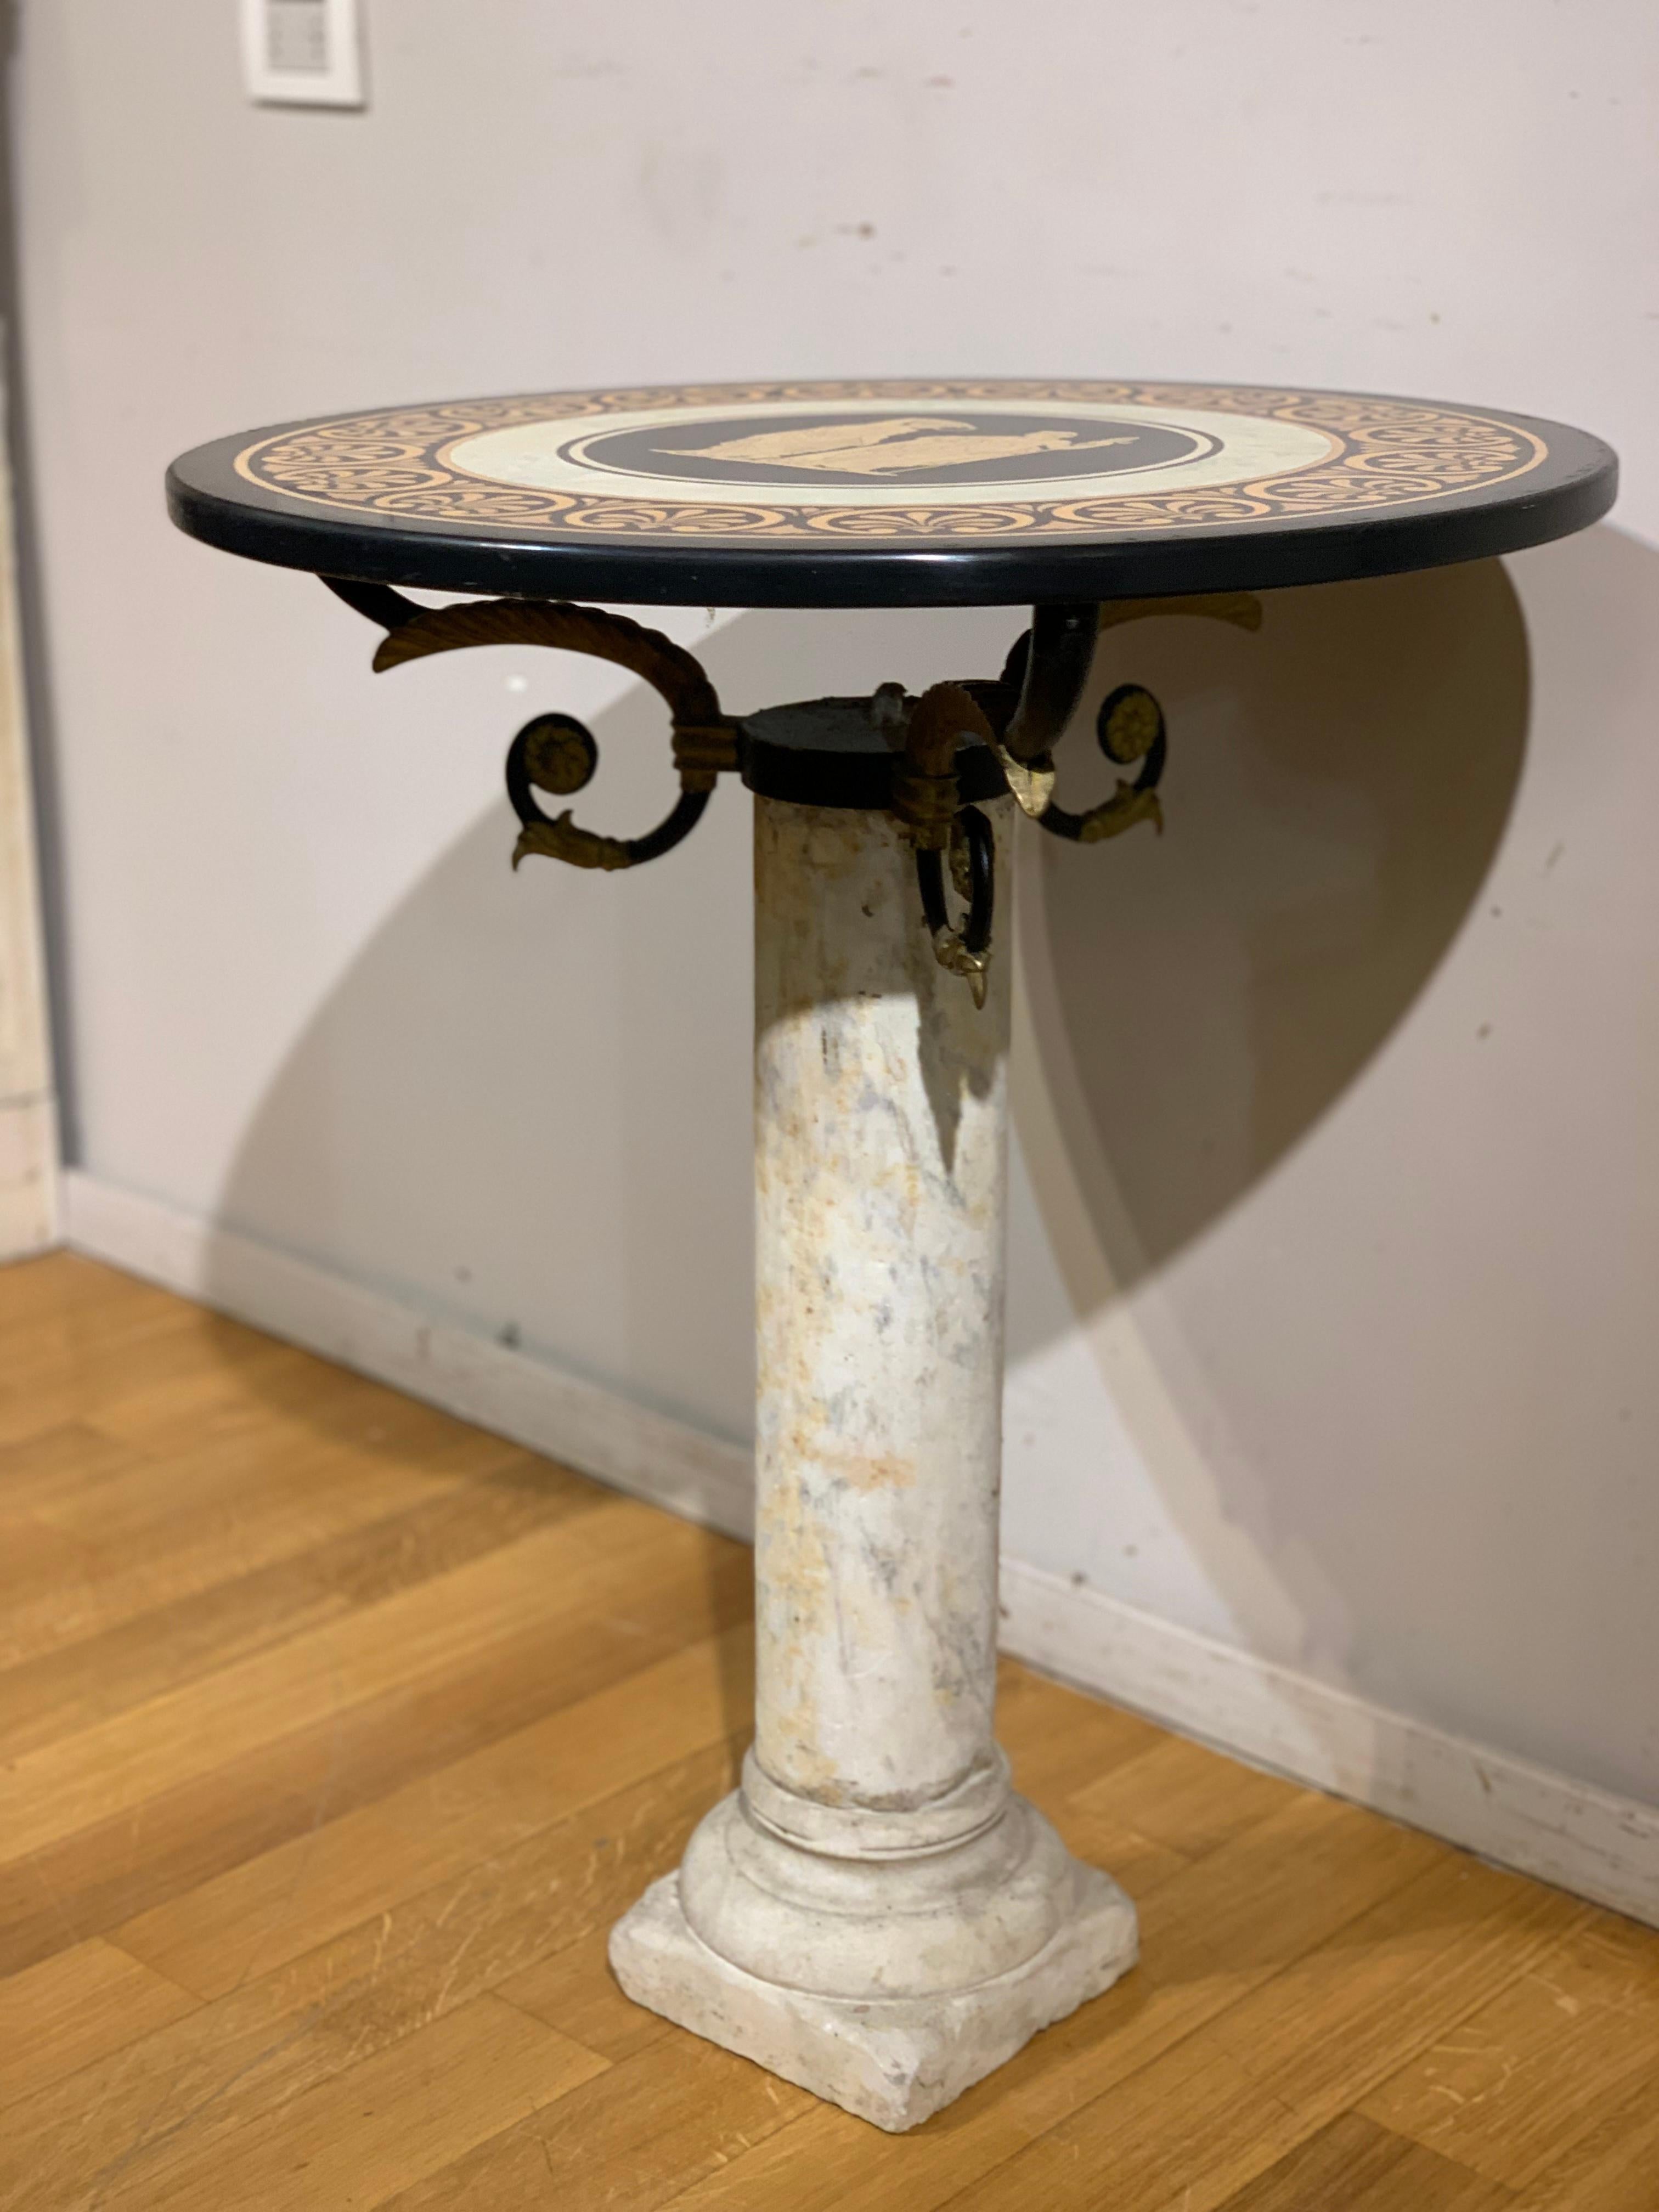 Late 19th Century Neoclassical Small Round Table in Carrara Marble and Scagliola For Sale 3